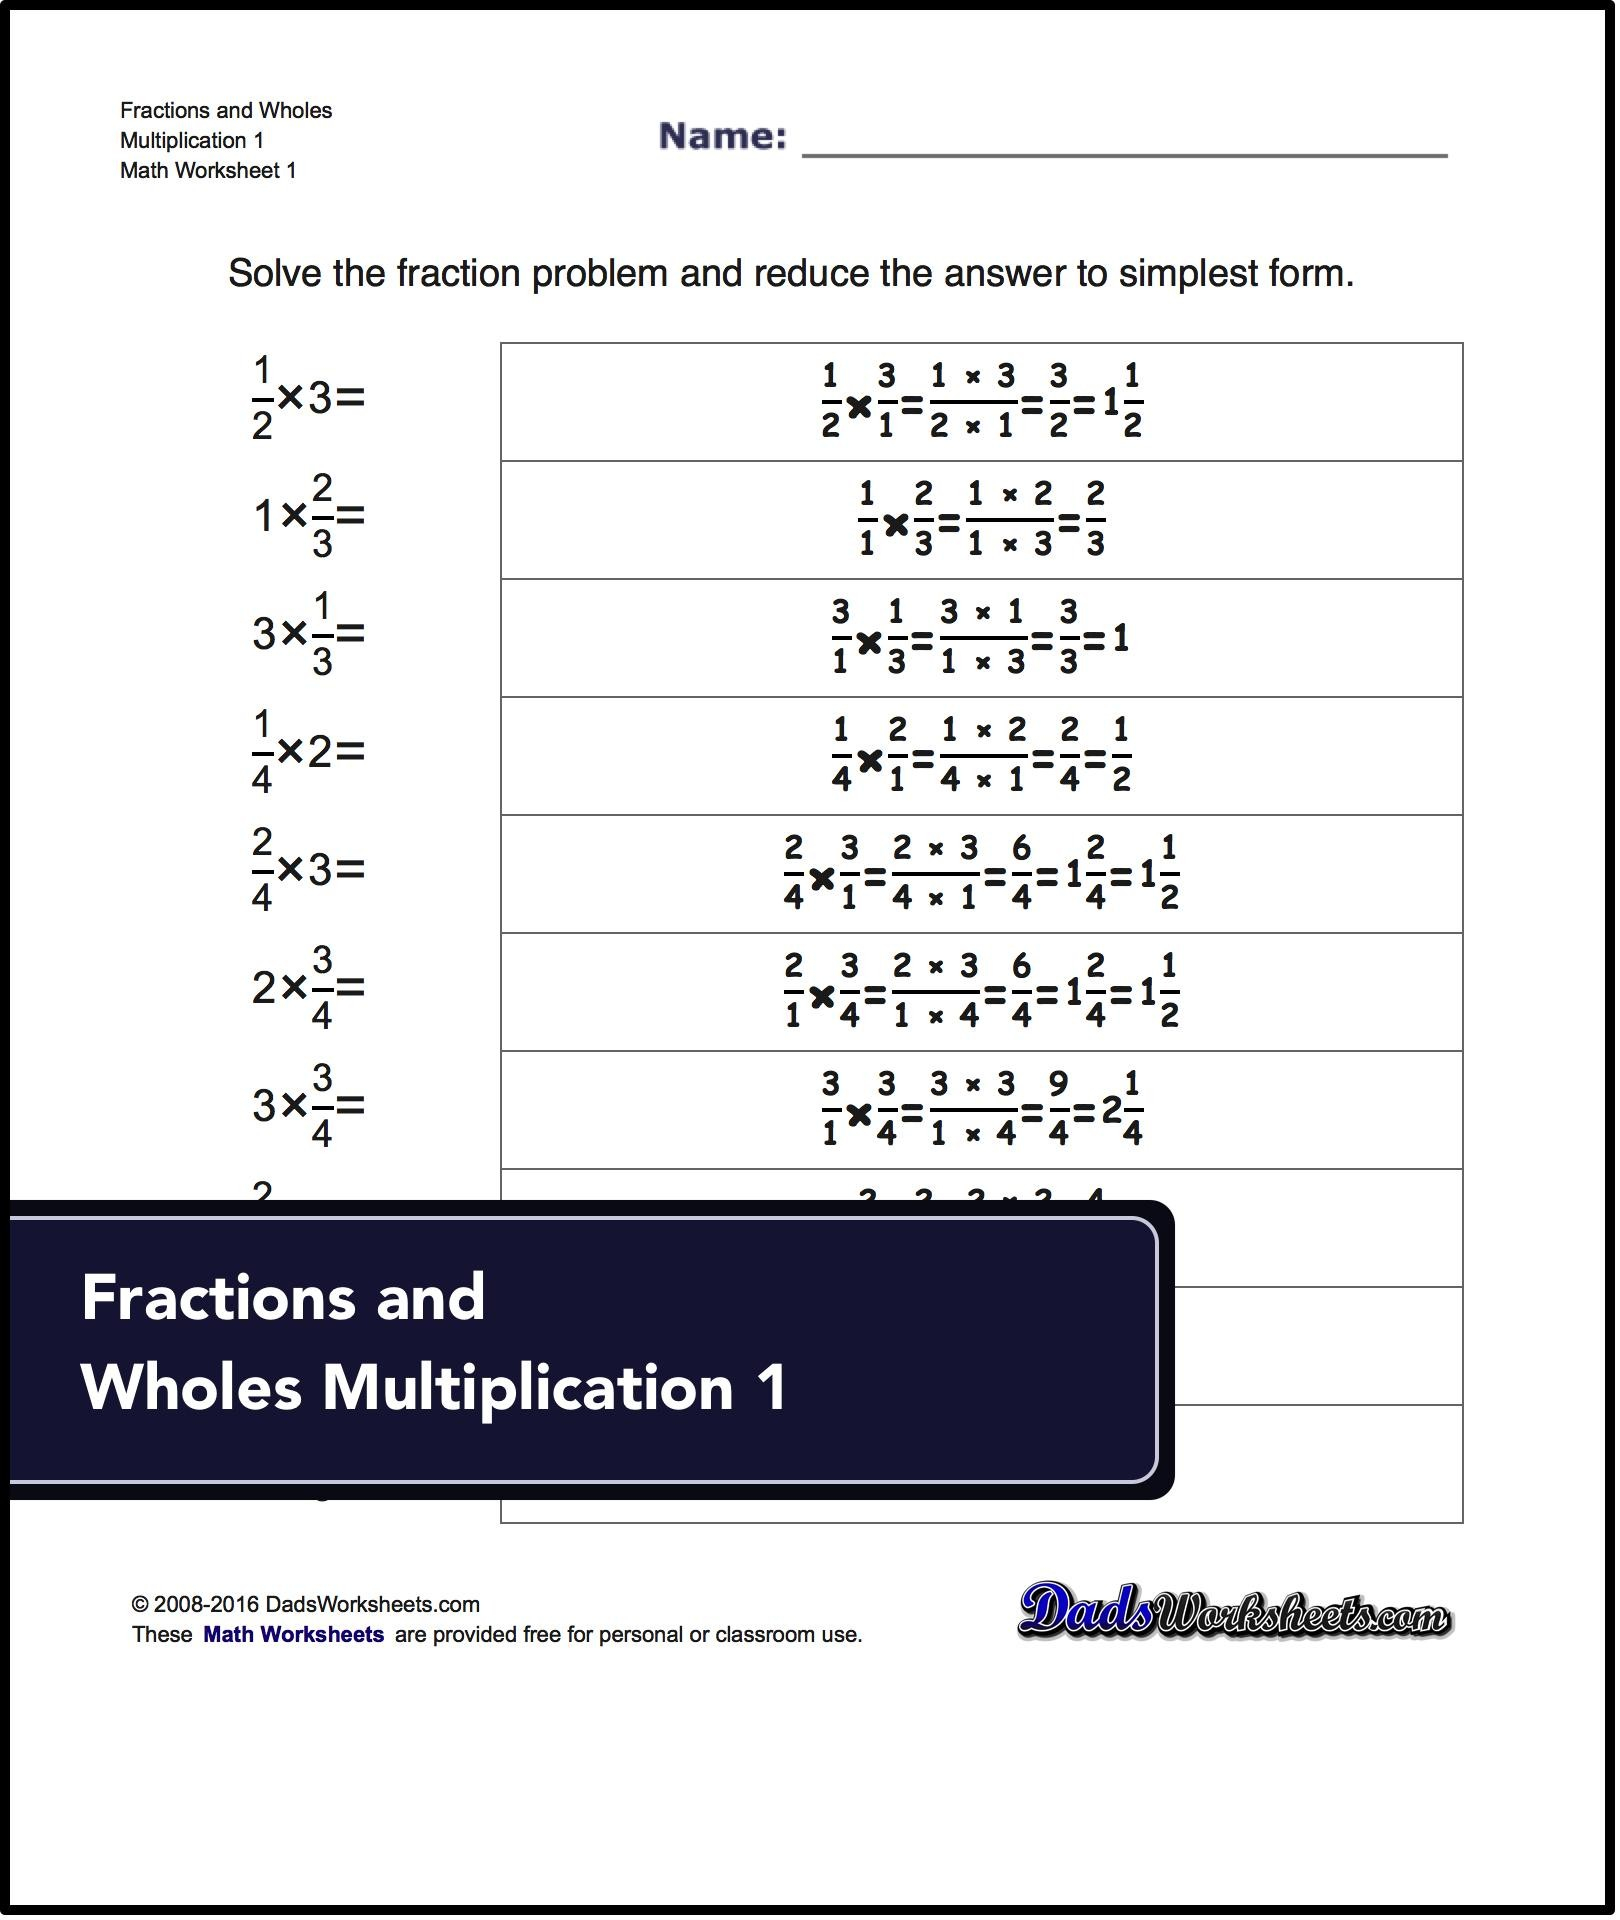 patterns-worksheets-dynamically-created-patterns-worksheets-pattern-grade-3-maths-worksheets